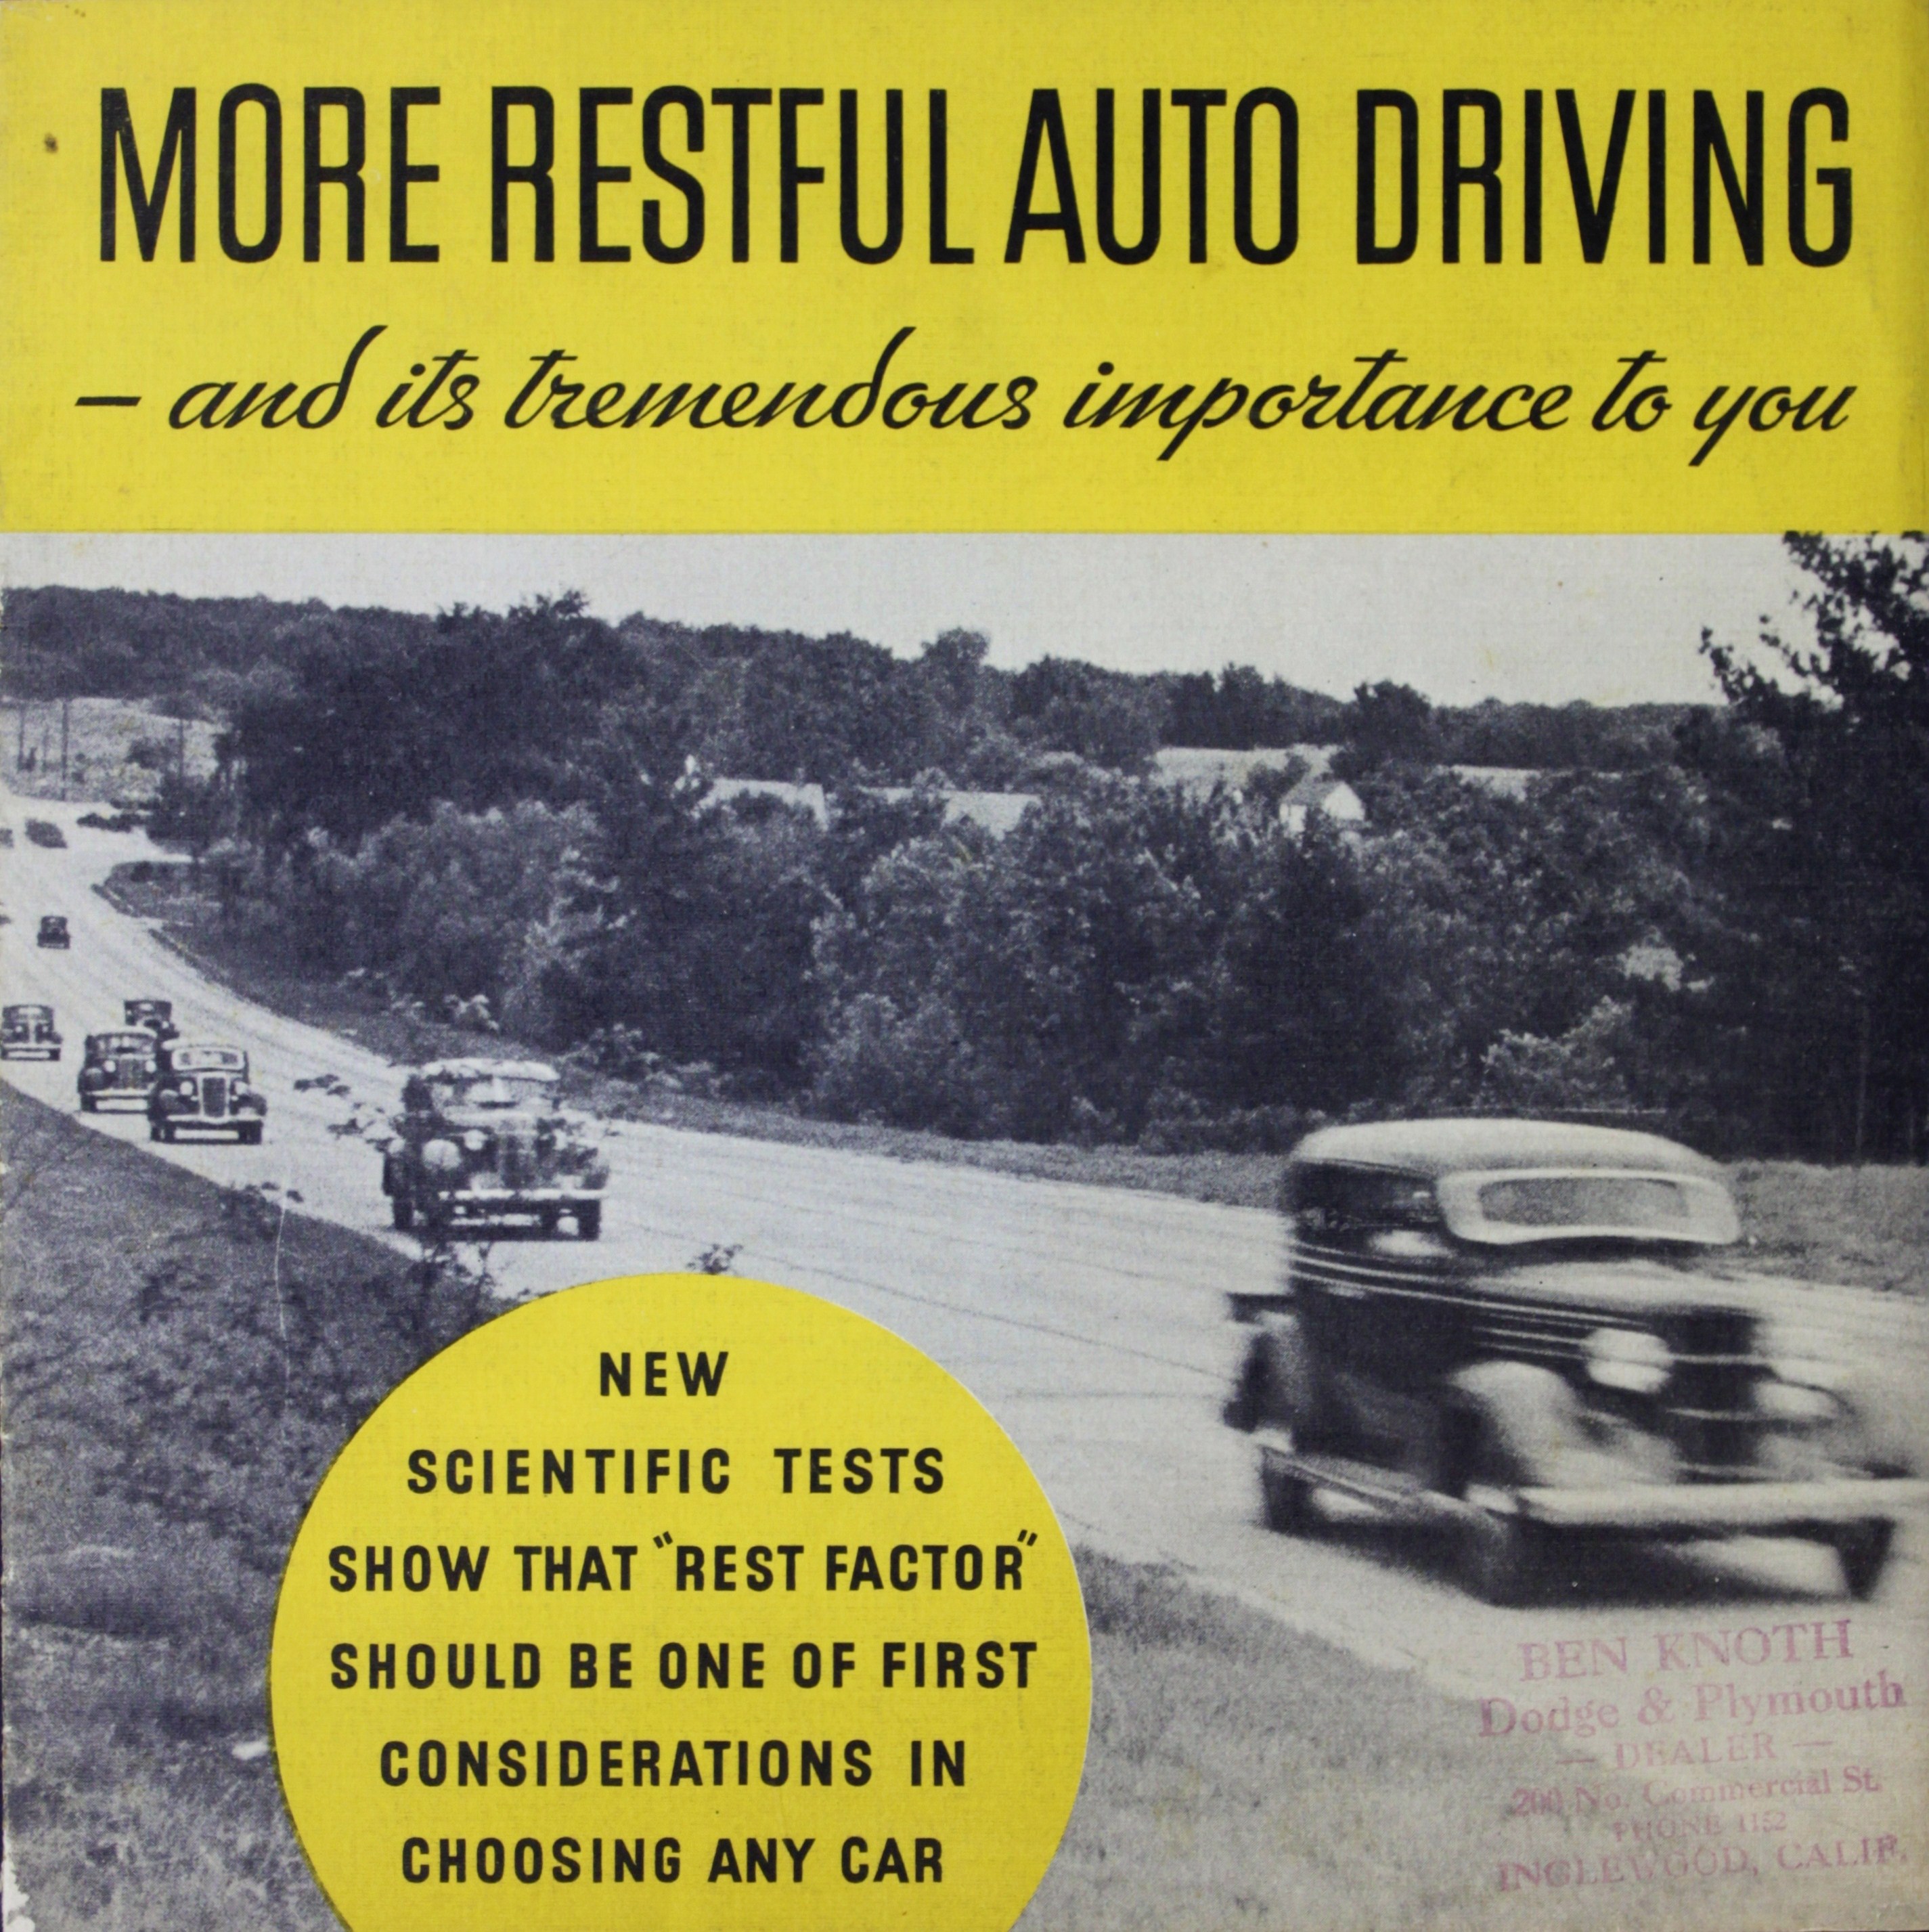 Cover of a the pamphlet 'More Restful Auto Driving'. Black and white photo of cars on a road.